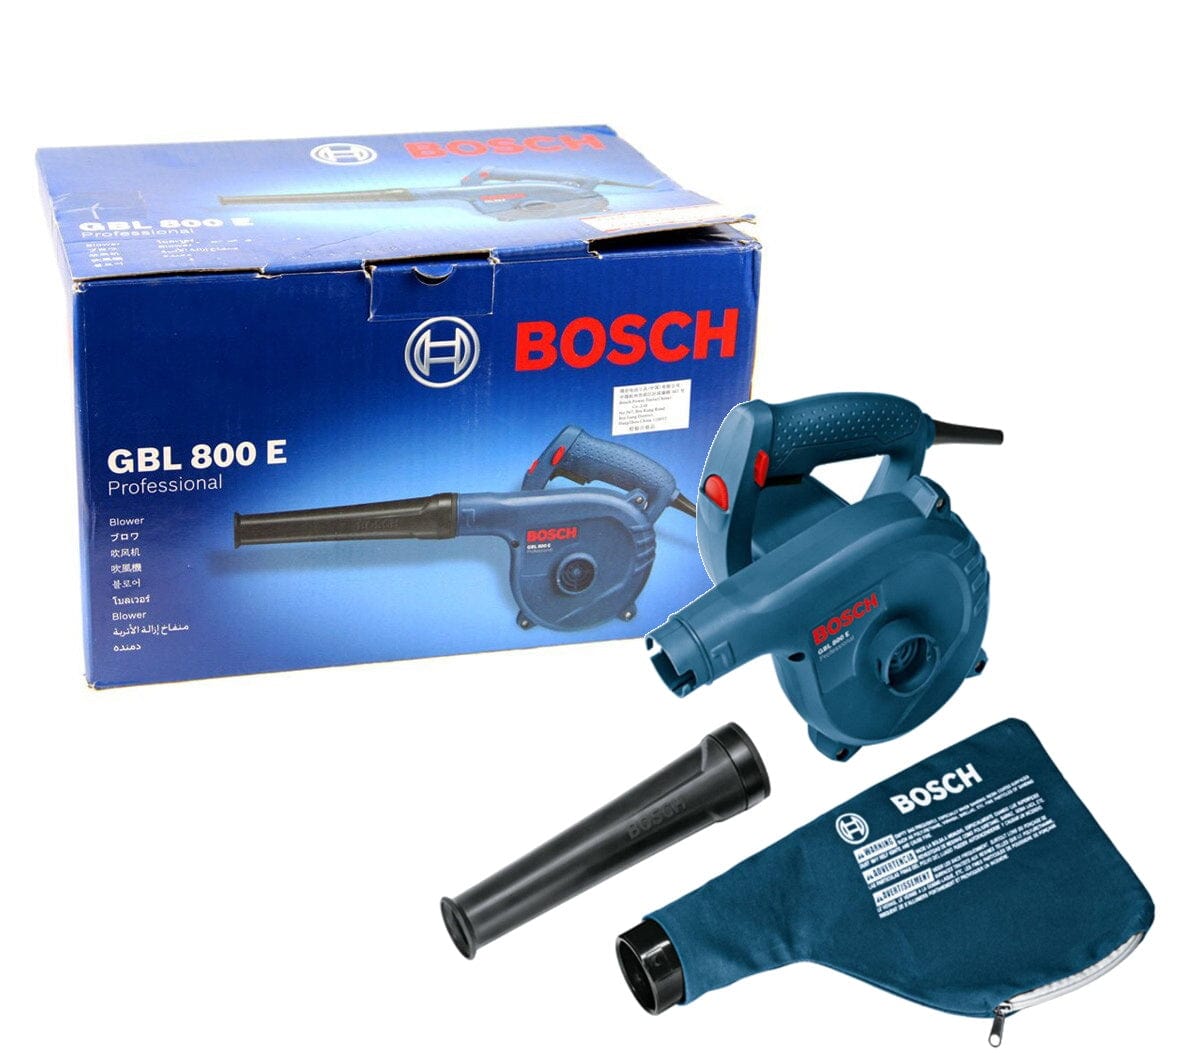 Maintain a clean and healthy workspace with the Bosch 15L Construction Dust Extractor 1100W (GAS 15) at SupplyMaster.store in Ghana. Industrial Cleaning Equipment Buy Tools hardware Building materials